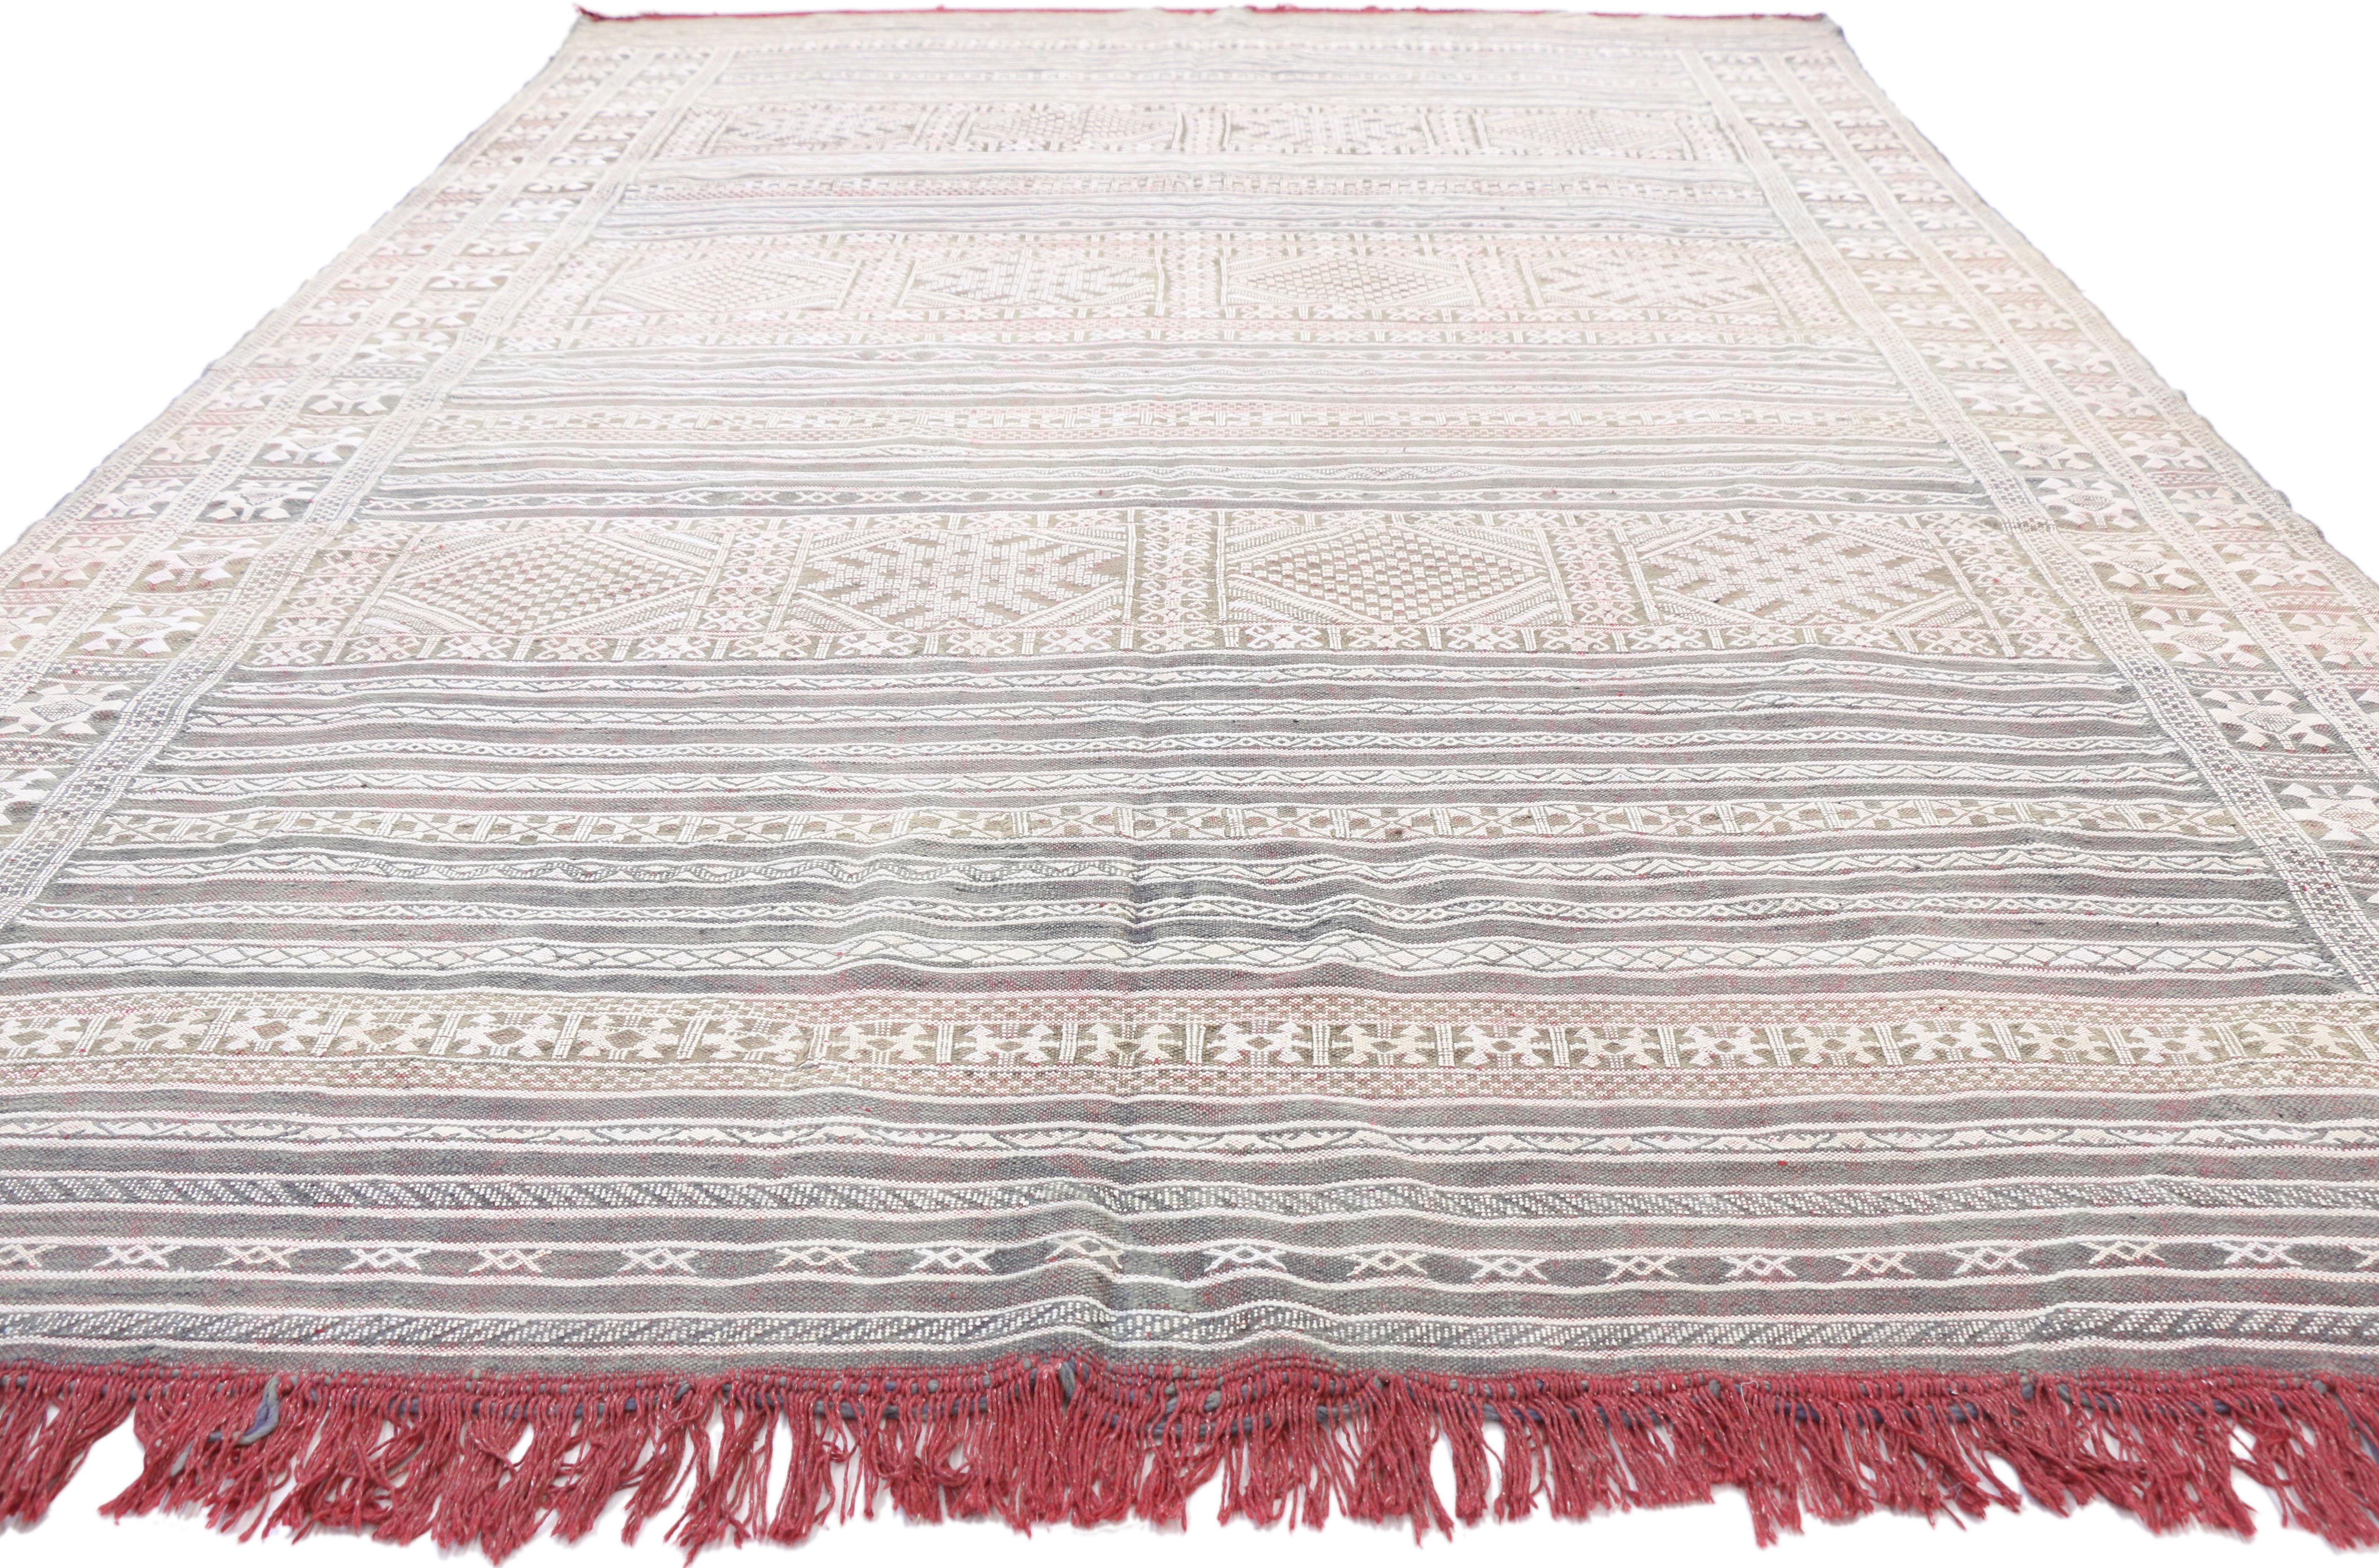 Hand-Woven Vintage Moroccan Zemmour Berber Kilim Area Rug with Bohemian Tribal Style